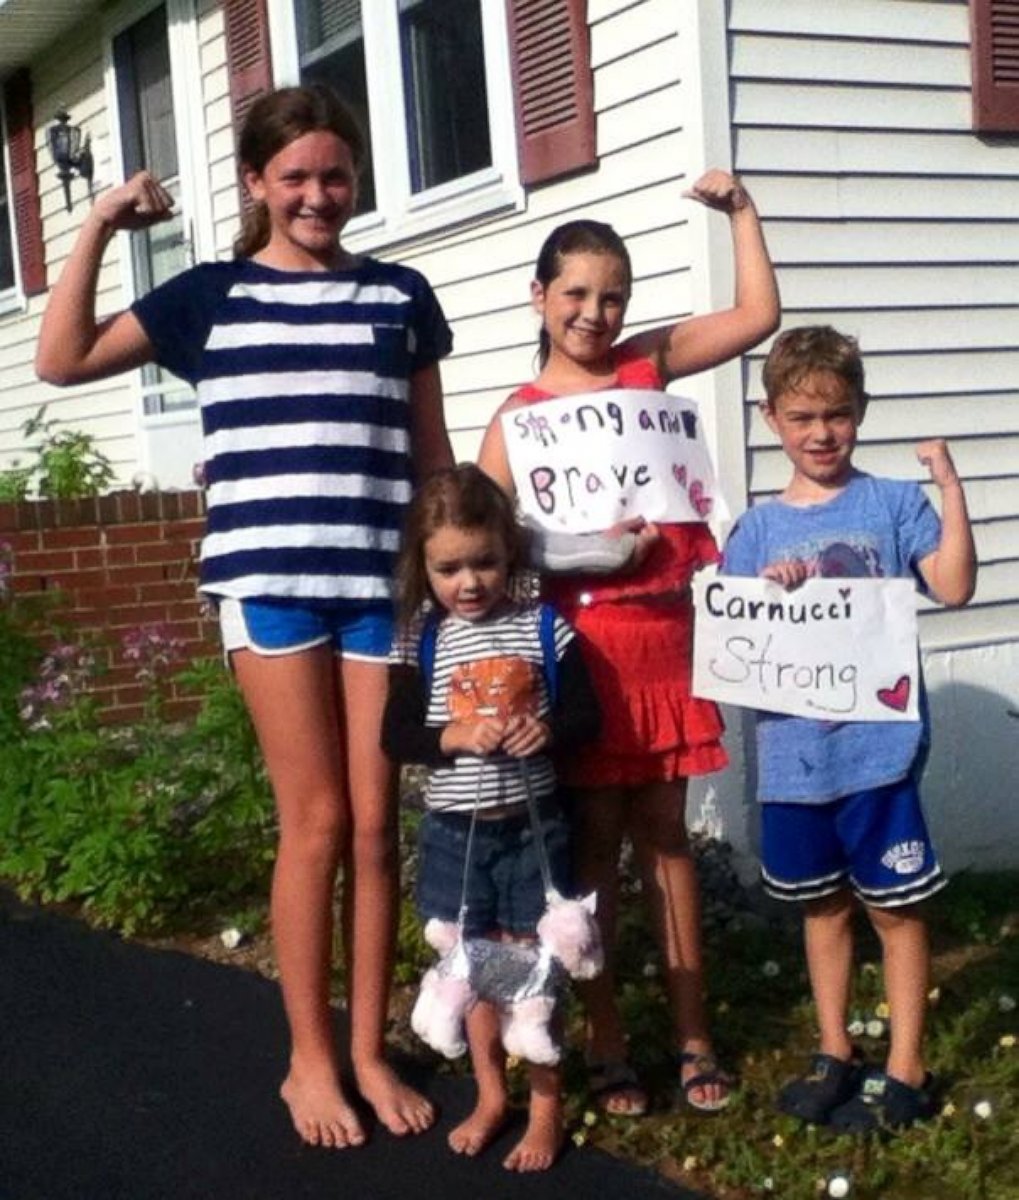 PHOTO: Friends made "Carnucci Strong" signs to support Carnucci through her recovery.